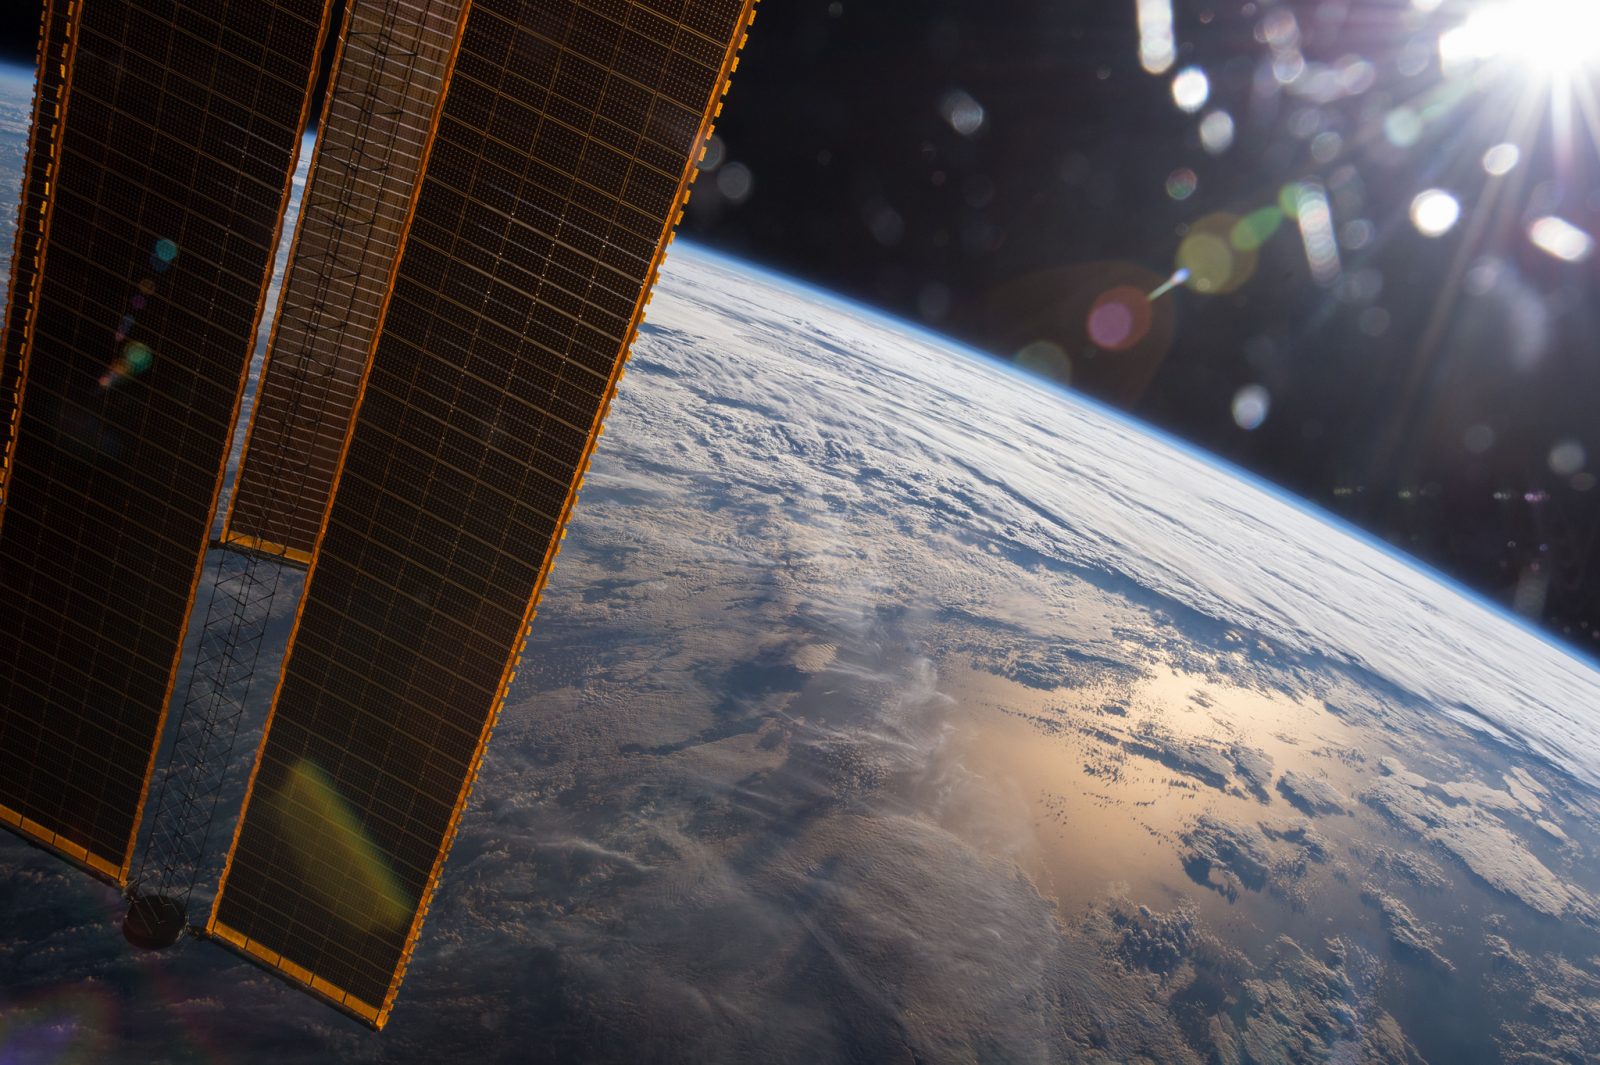 ISS043E091794 (04/07/2015) --- Astronauts and cosmonauts aboard the International Space Station are regular witness to the beauty of our planet Earth from their high vantage point. This image was taken on Apr 7, 2015 by the crew of Expedition 43.